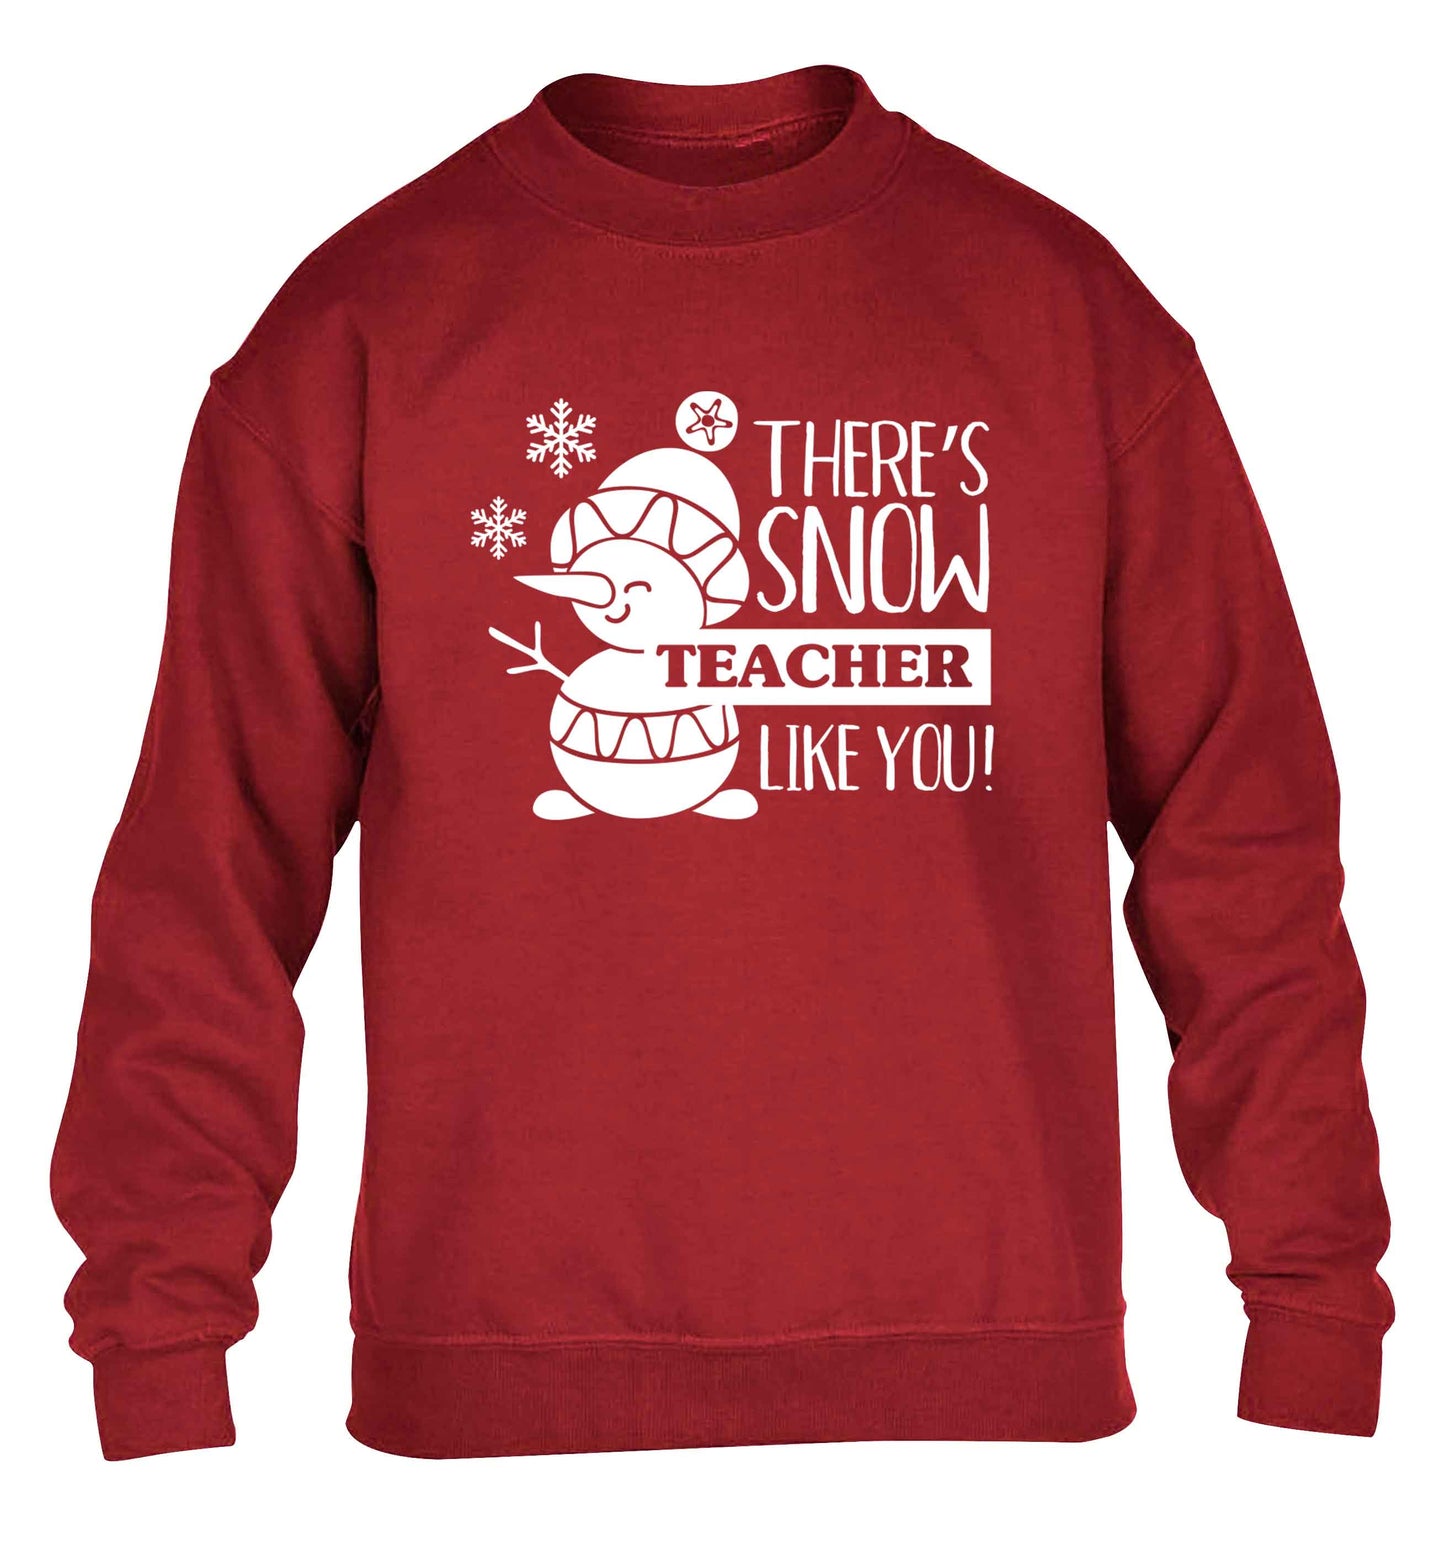 There's snow teacher like you children's grey sweater 12-13 Years